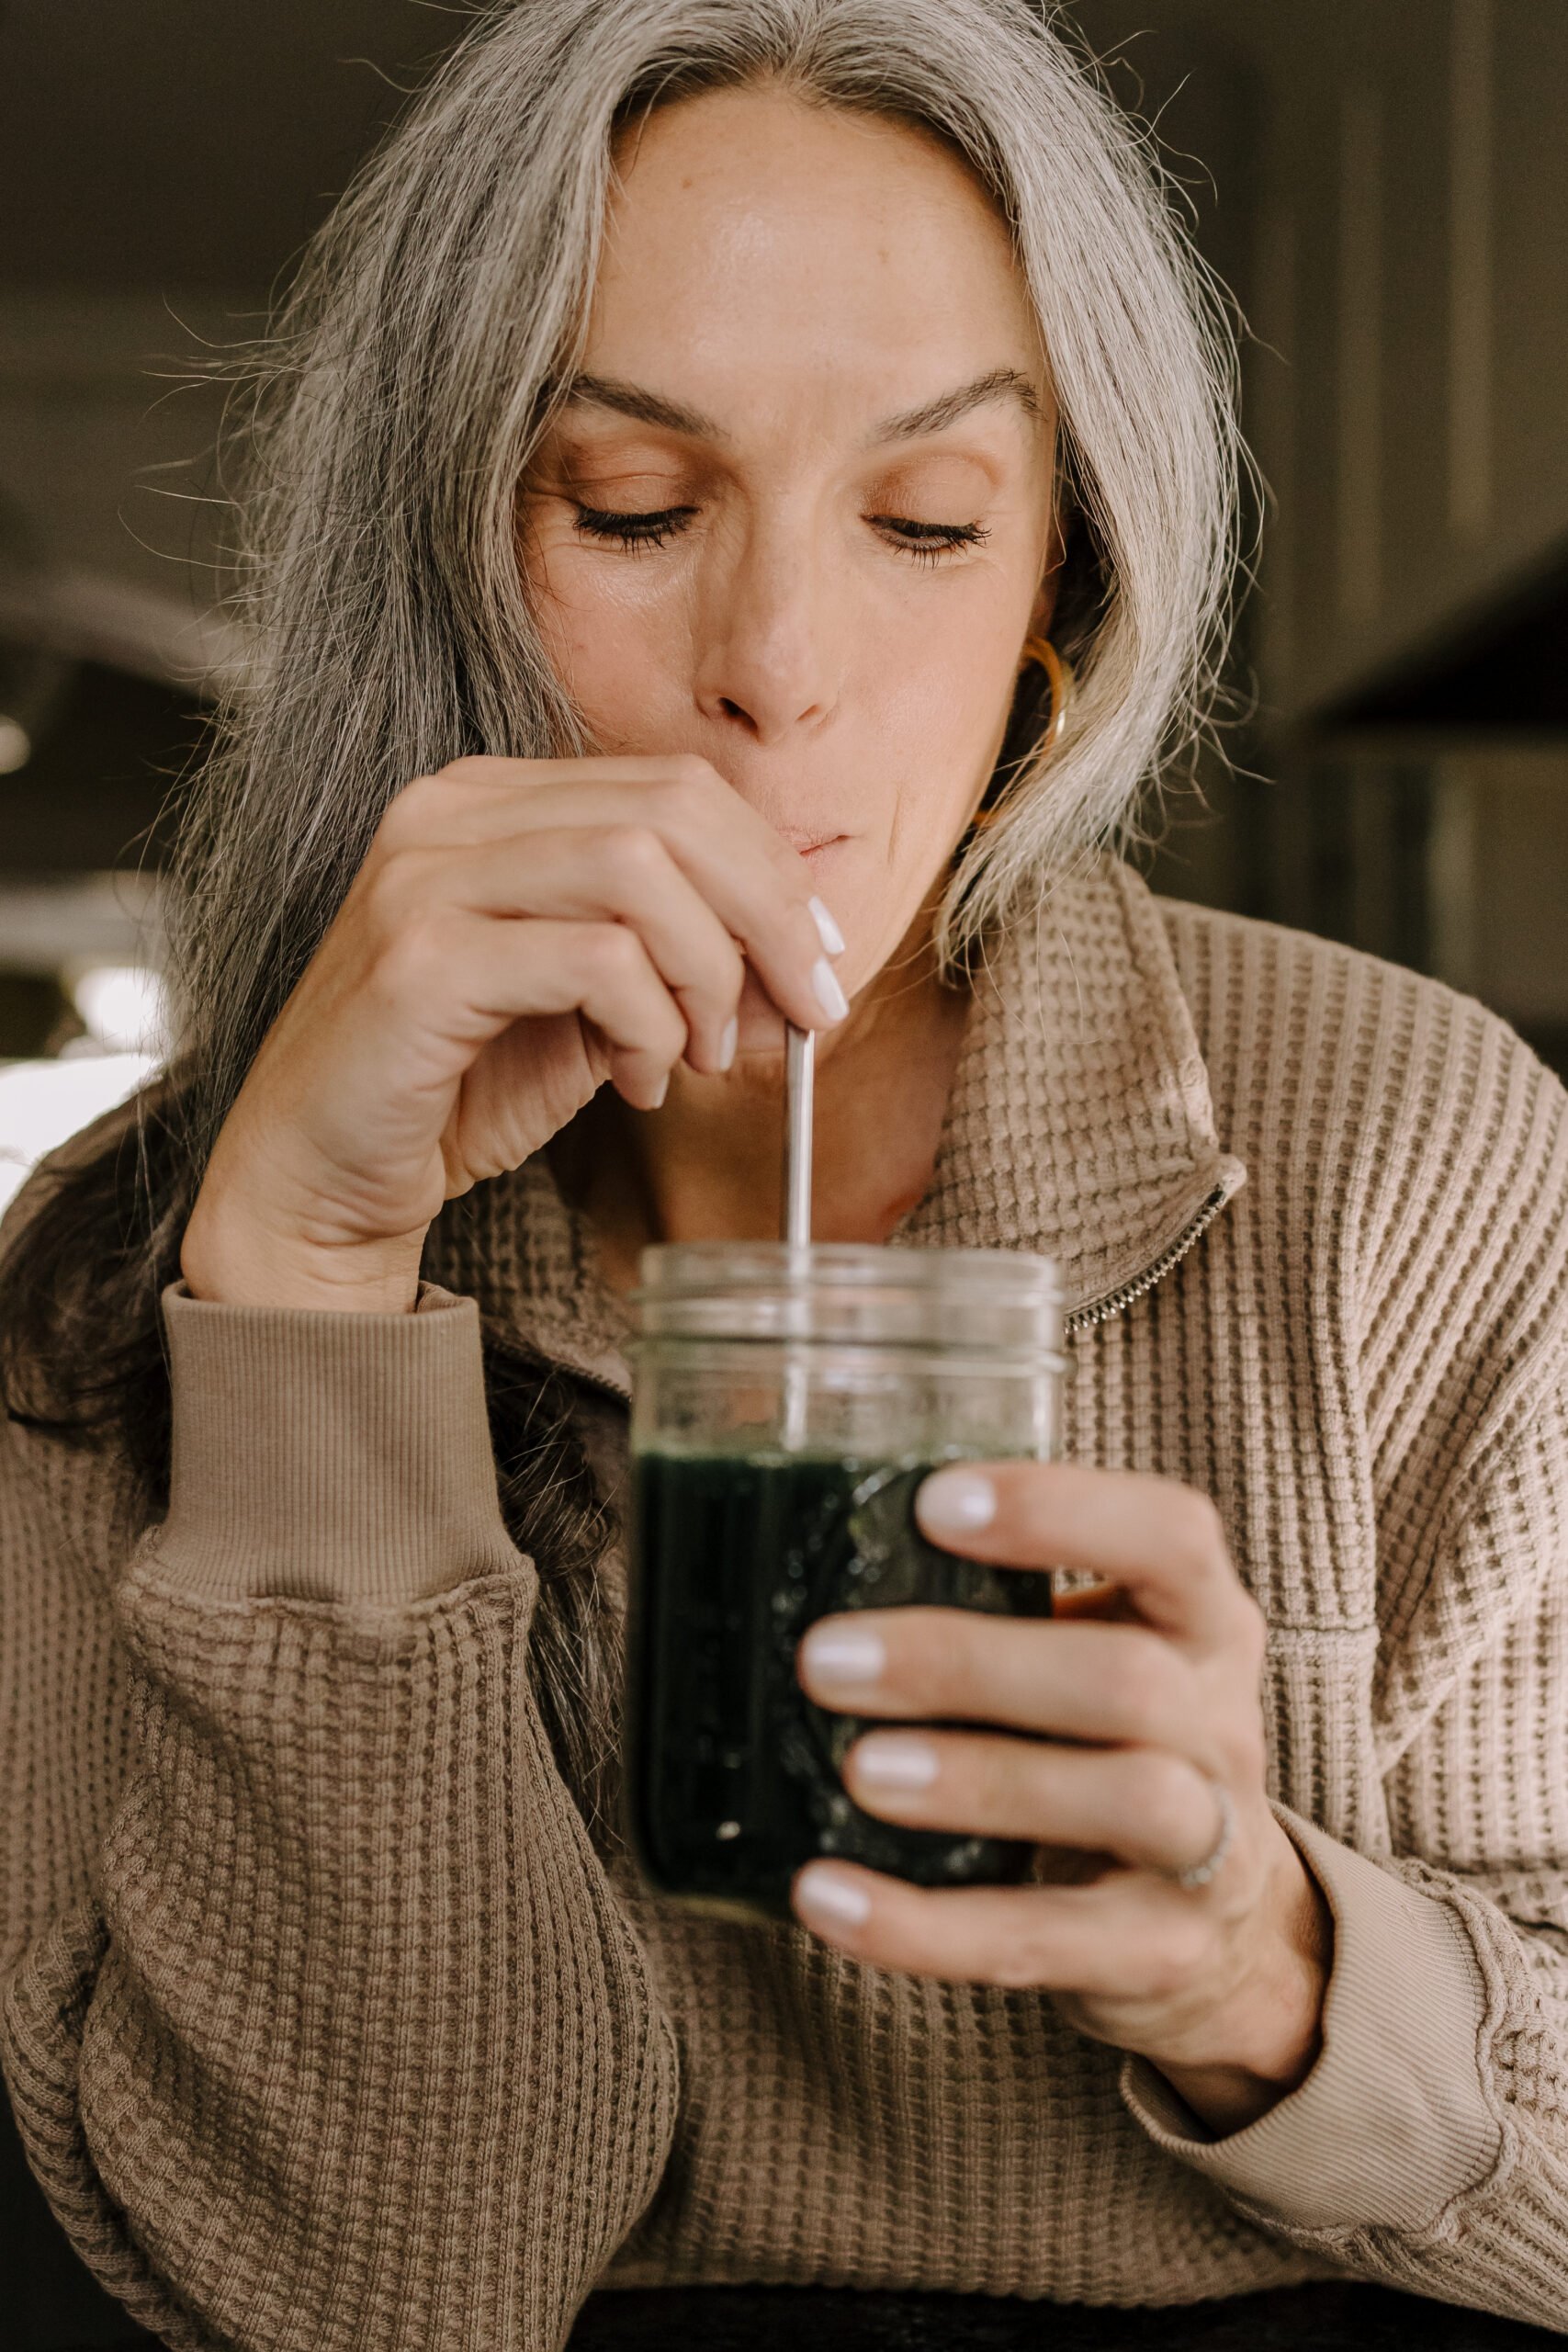 A woman drinking greens from a glass.